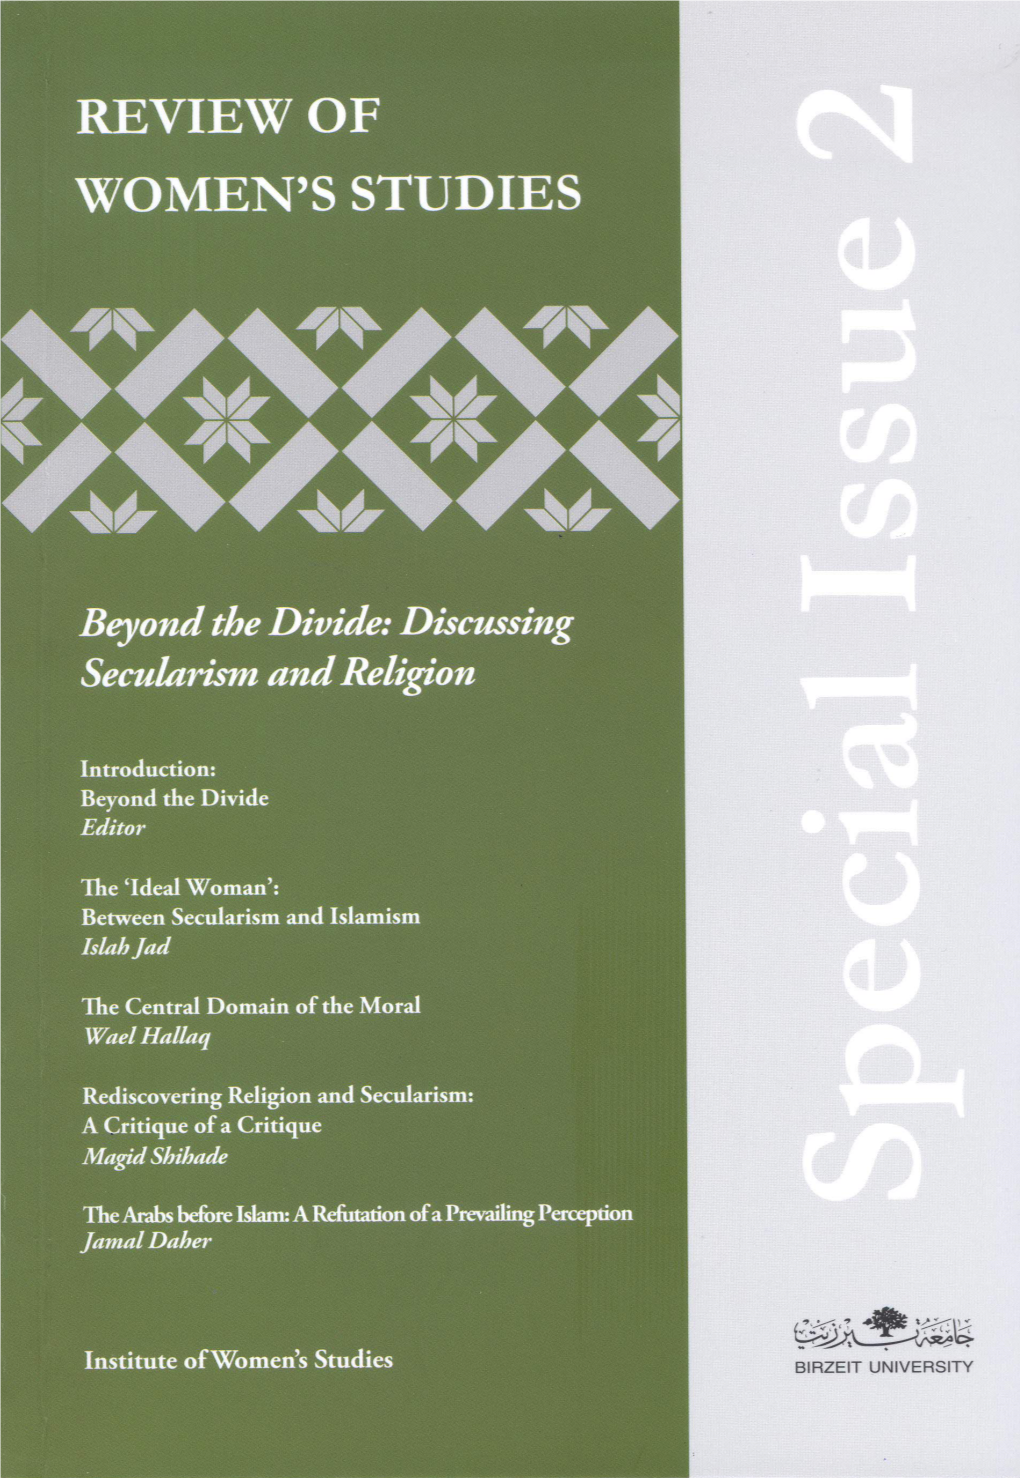 Beyond the Divide: Discussing Secularism and Religion